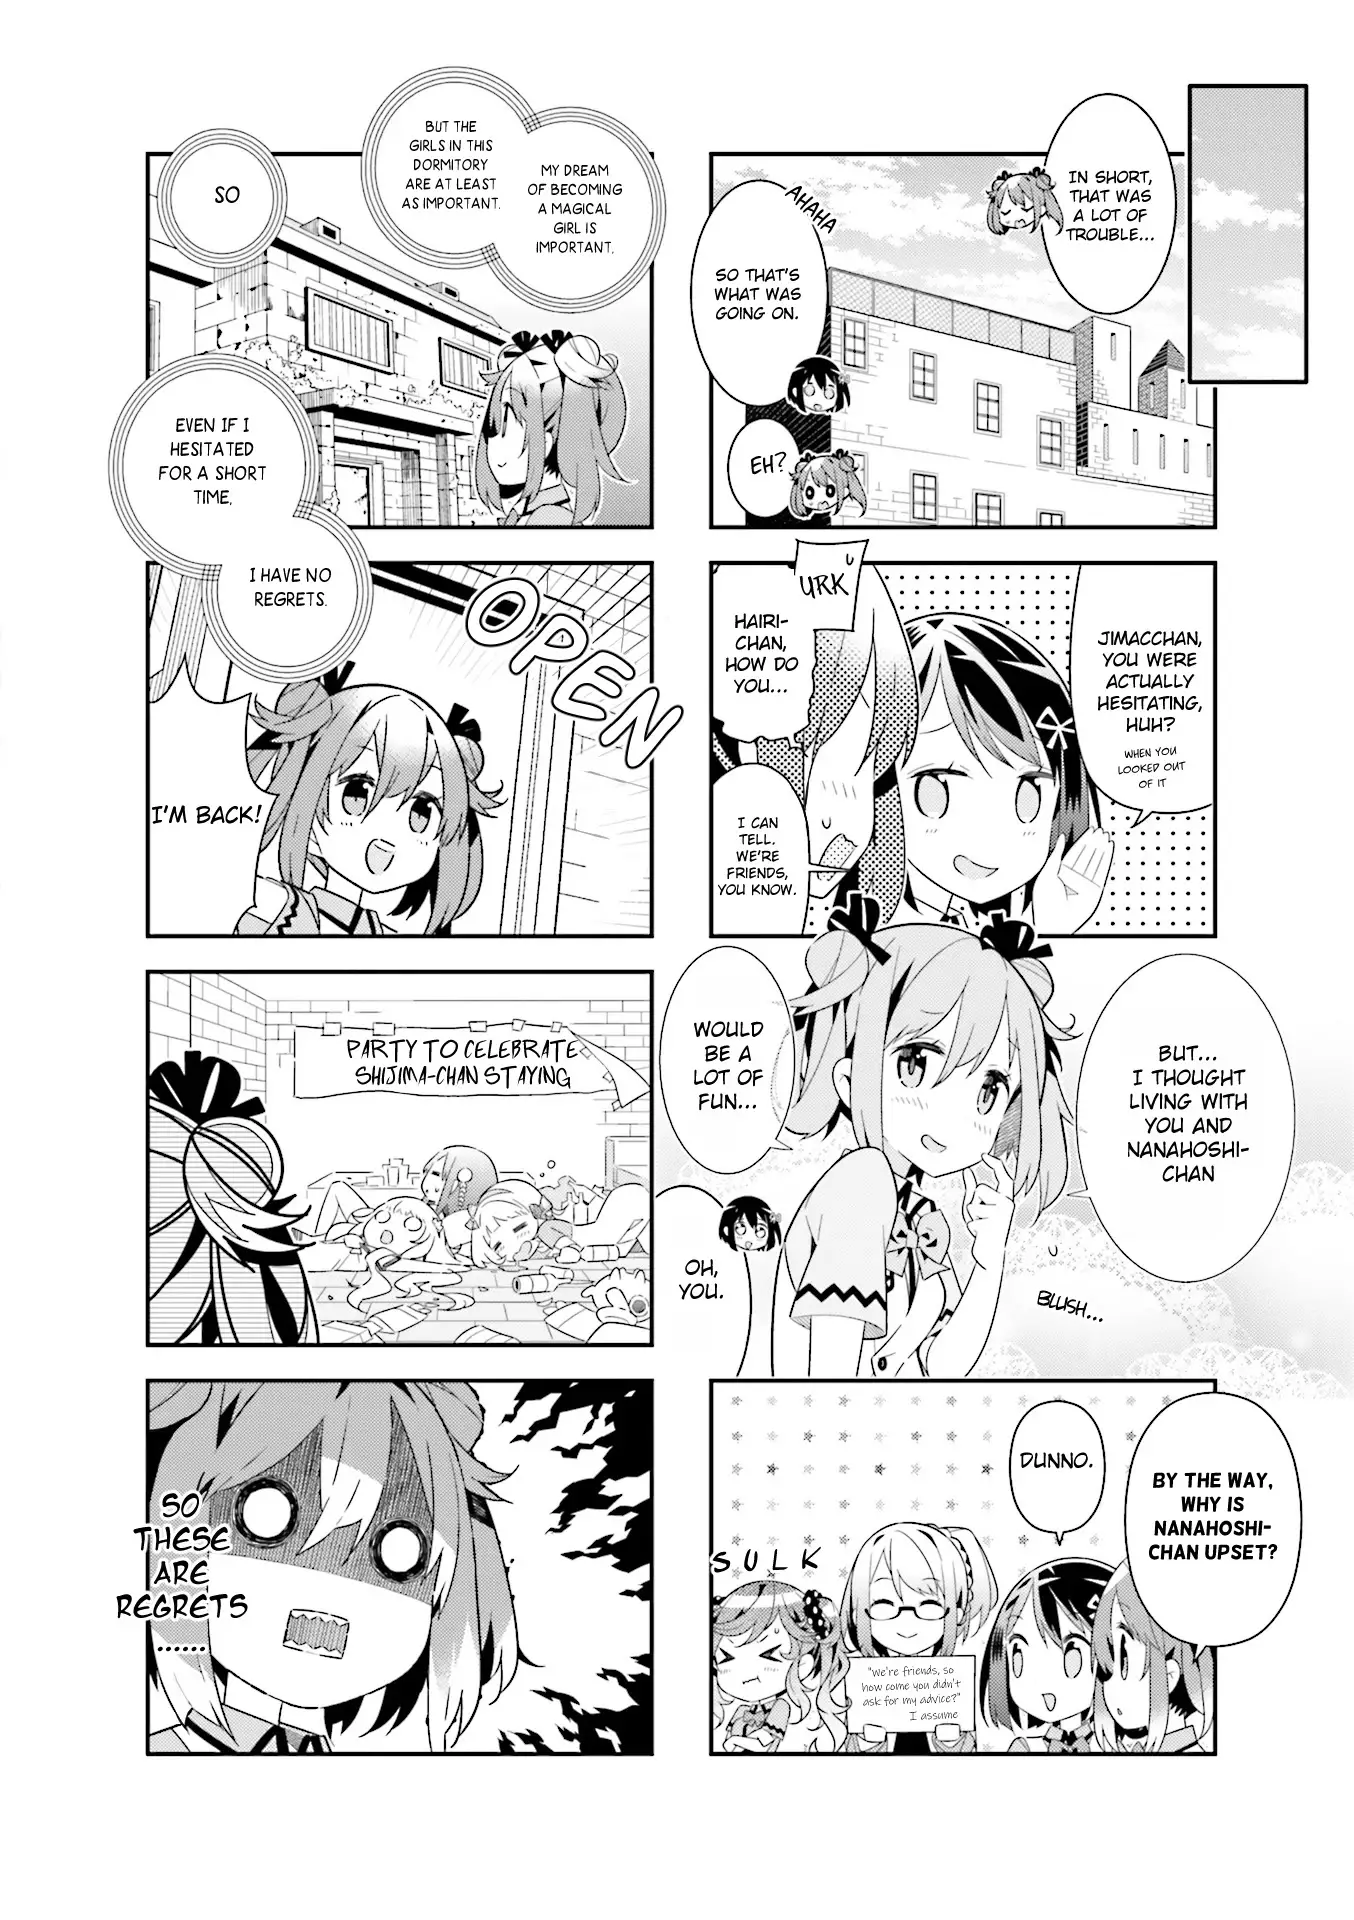 The Life After Retirement Of Magical Girls - 12 page 8-ce2d6e91